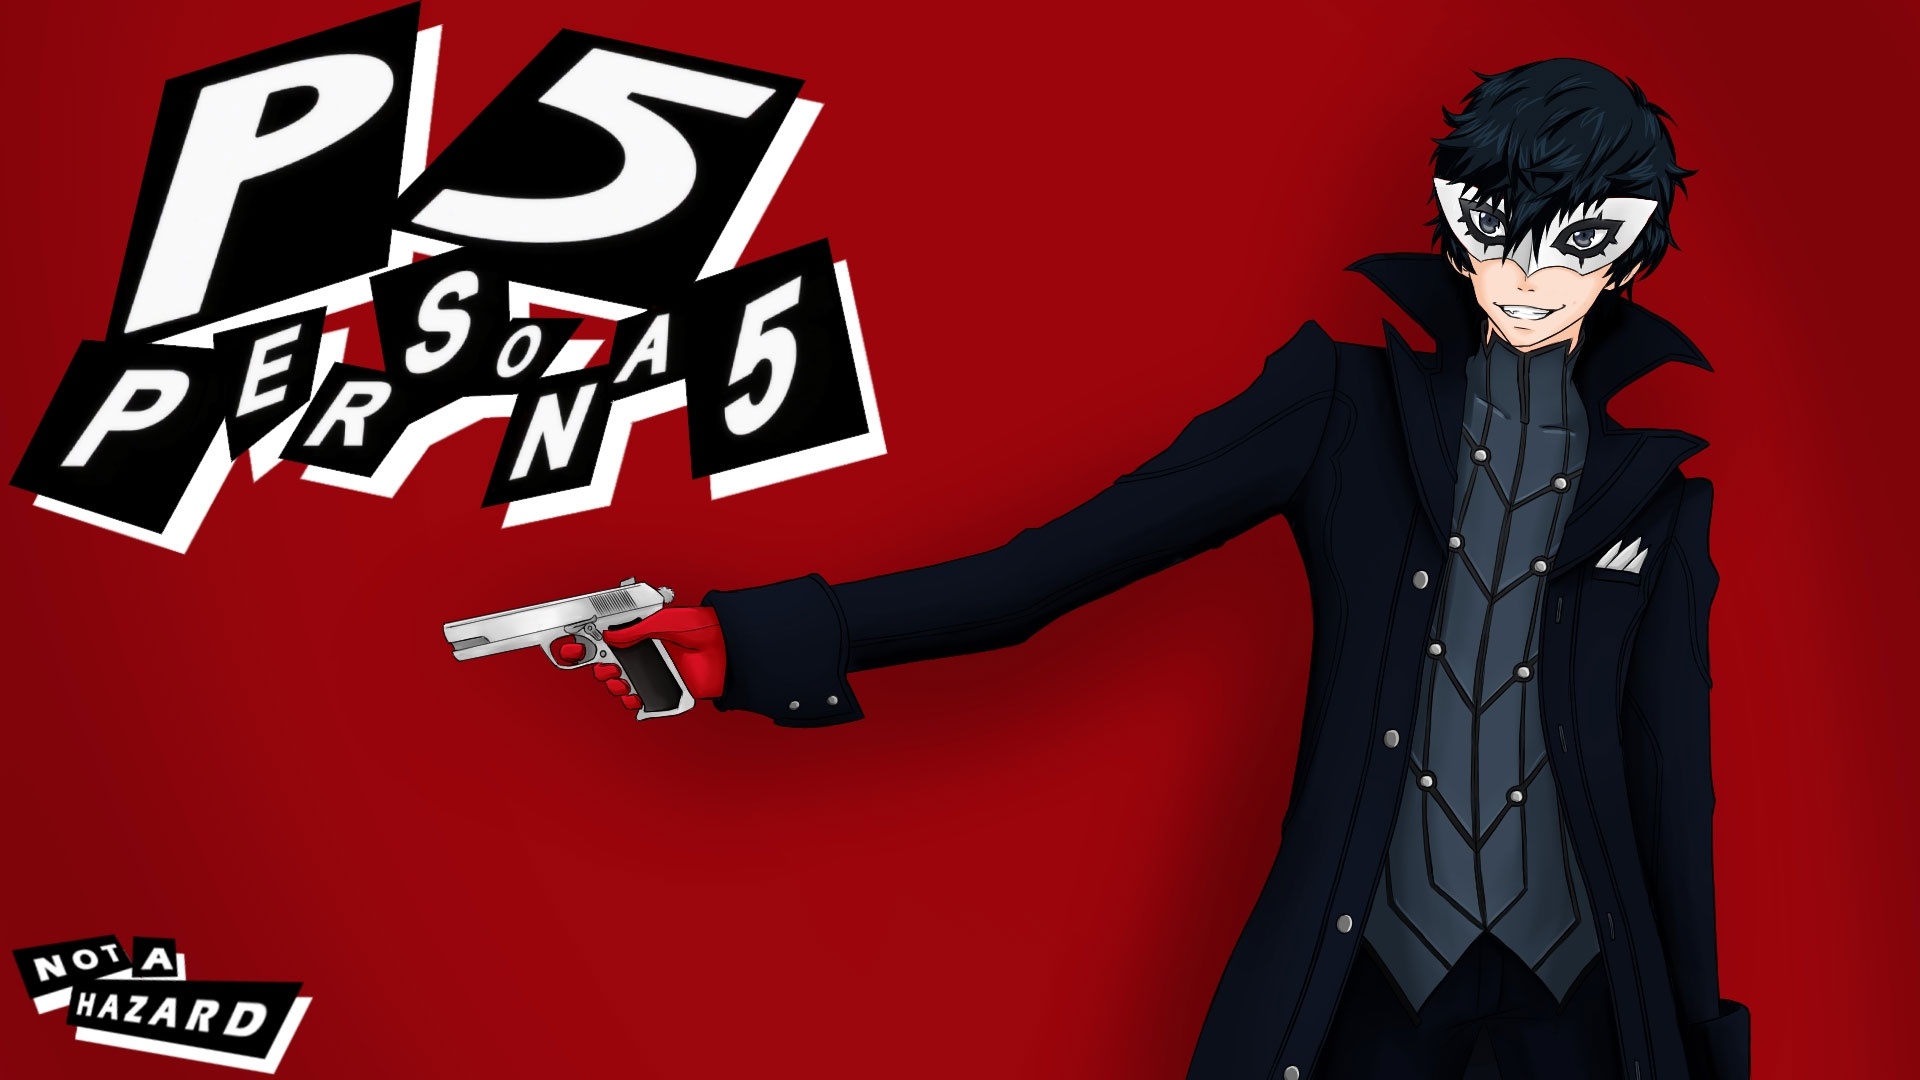 How to Get True Ending in Persona 5